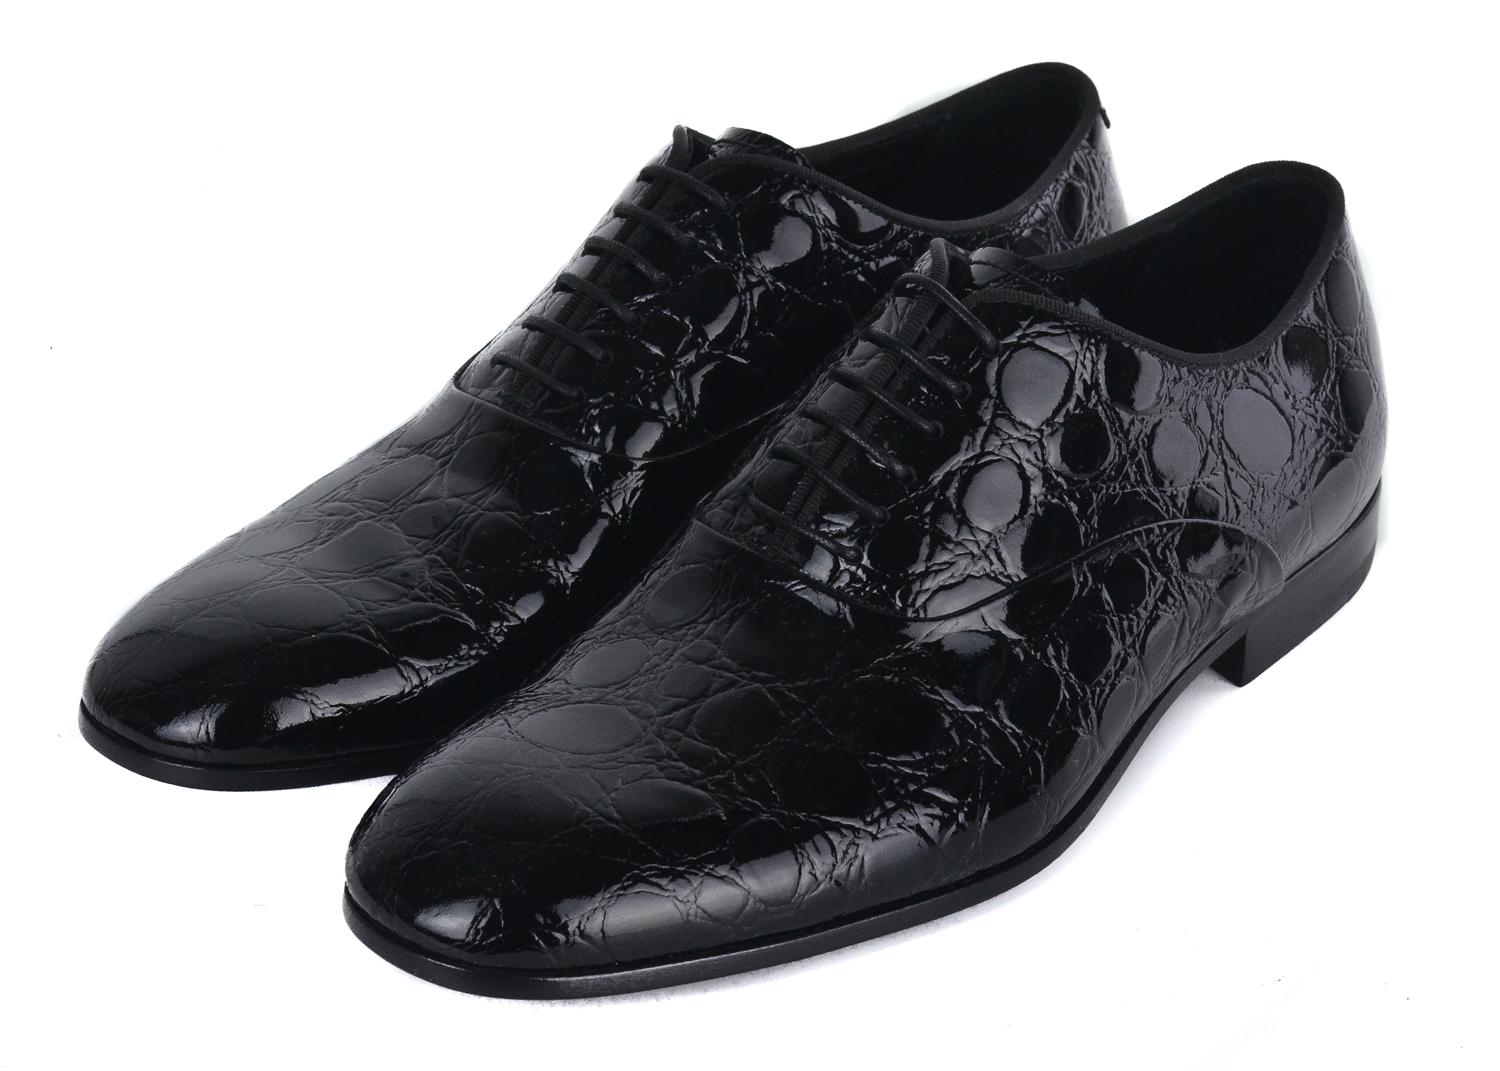 Fulfill your destiny in your striking Giorgio Armani Croc embossed oxfords. This perfectly crafted pavement masterpiece features a lux croc embossed patent leather, complimentary lace up closure, and tasteful logo engraved patent leather sole. You